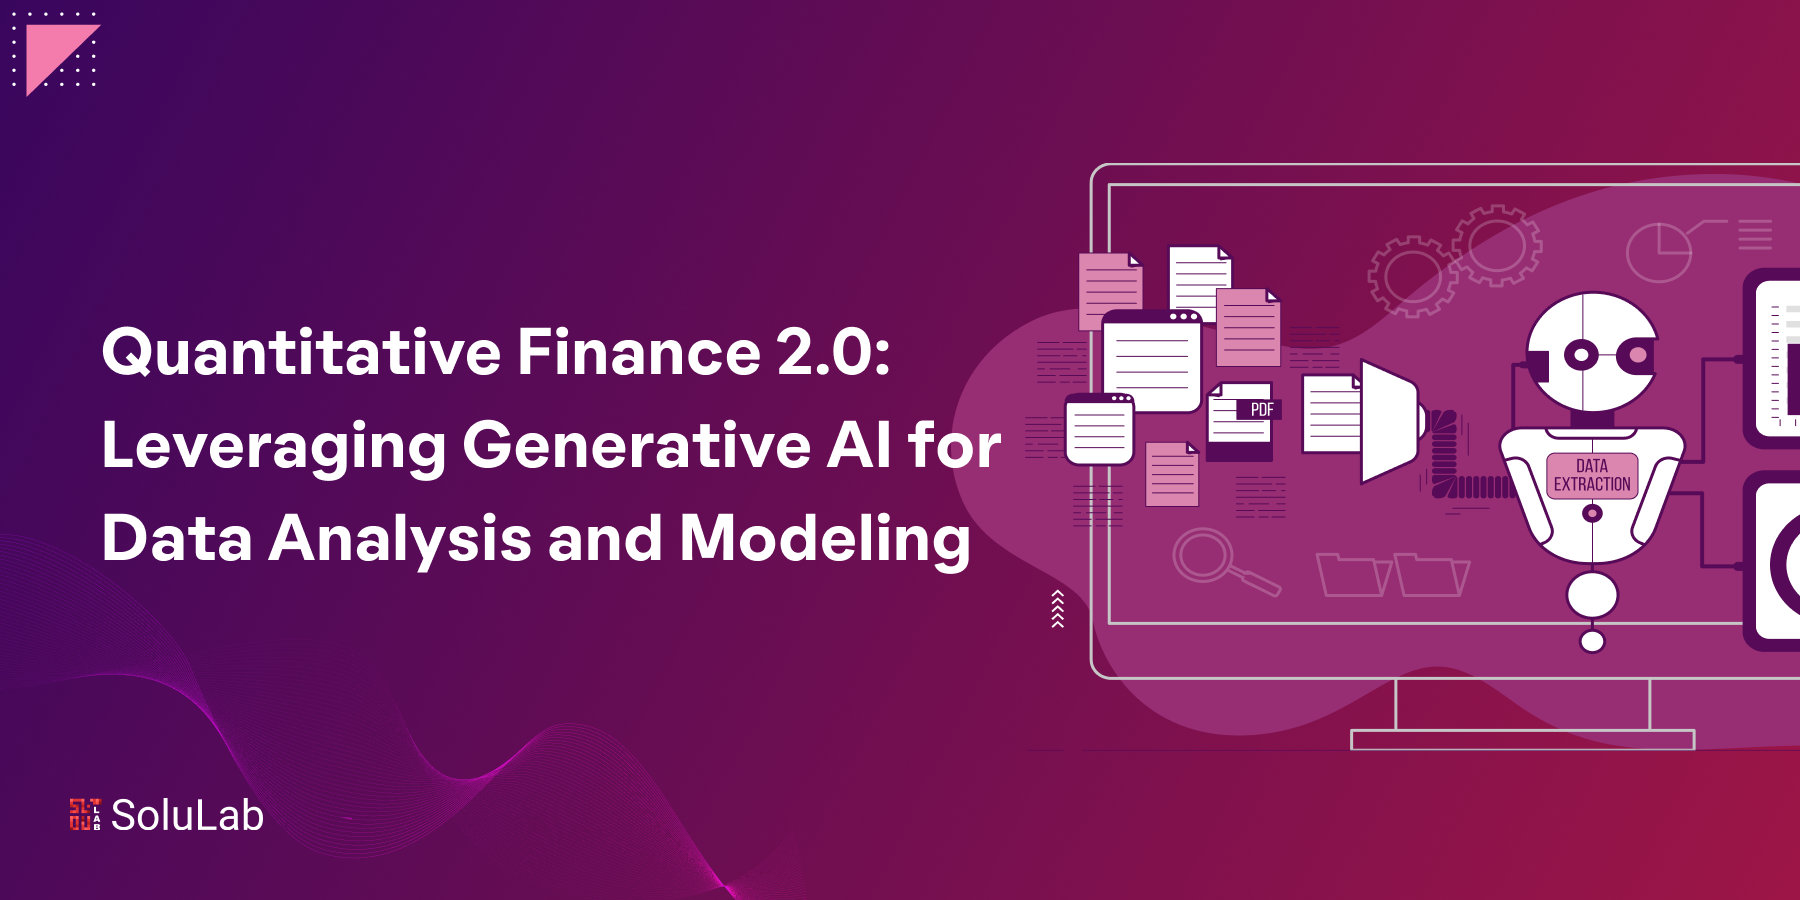 Quantitative Finance 2.0: Leveraging Generative AI for Data Analysis and Modeling